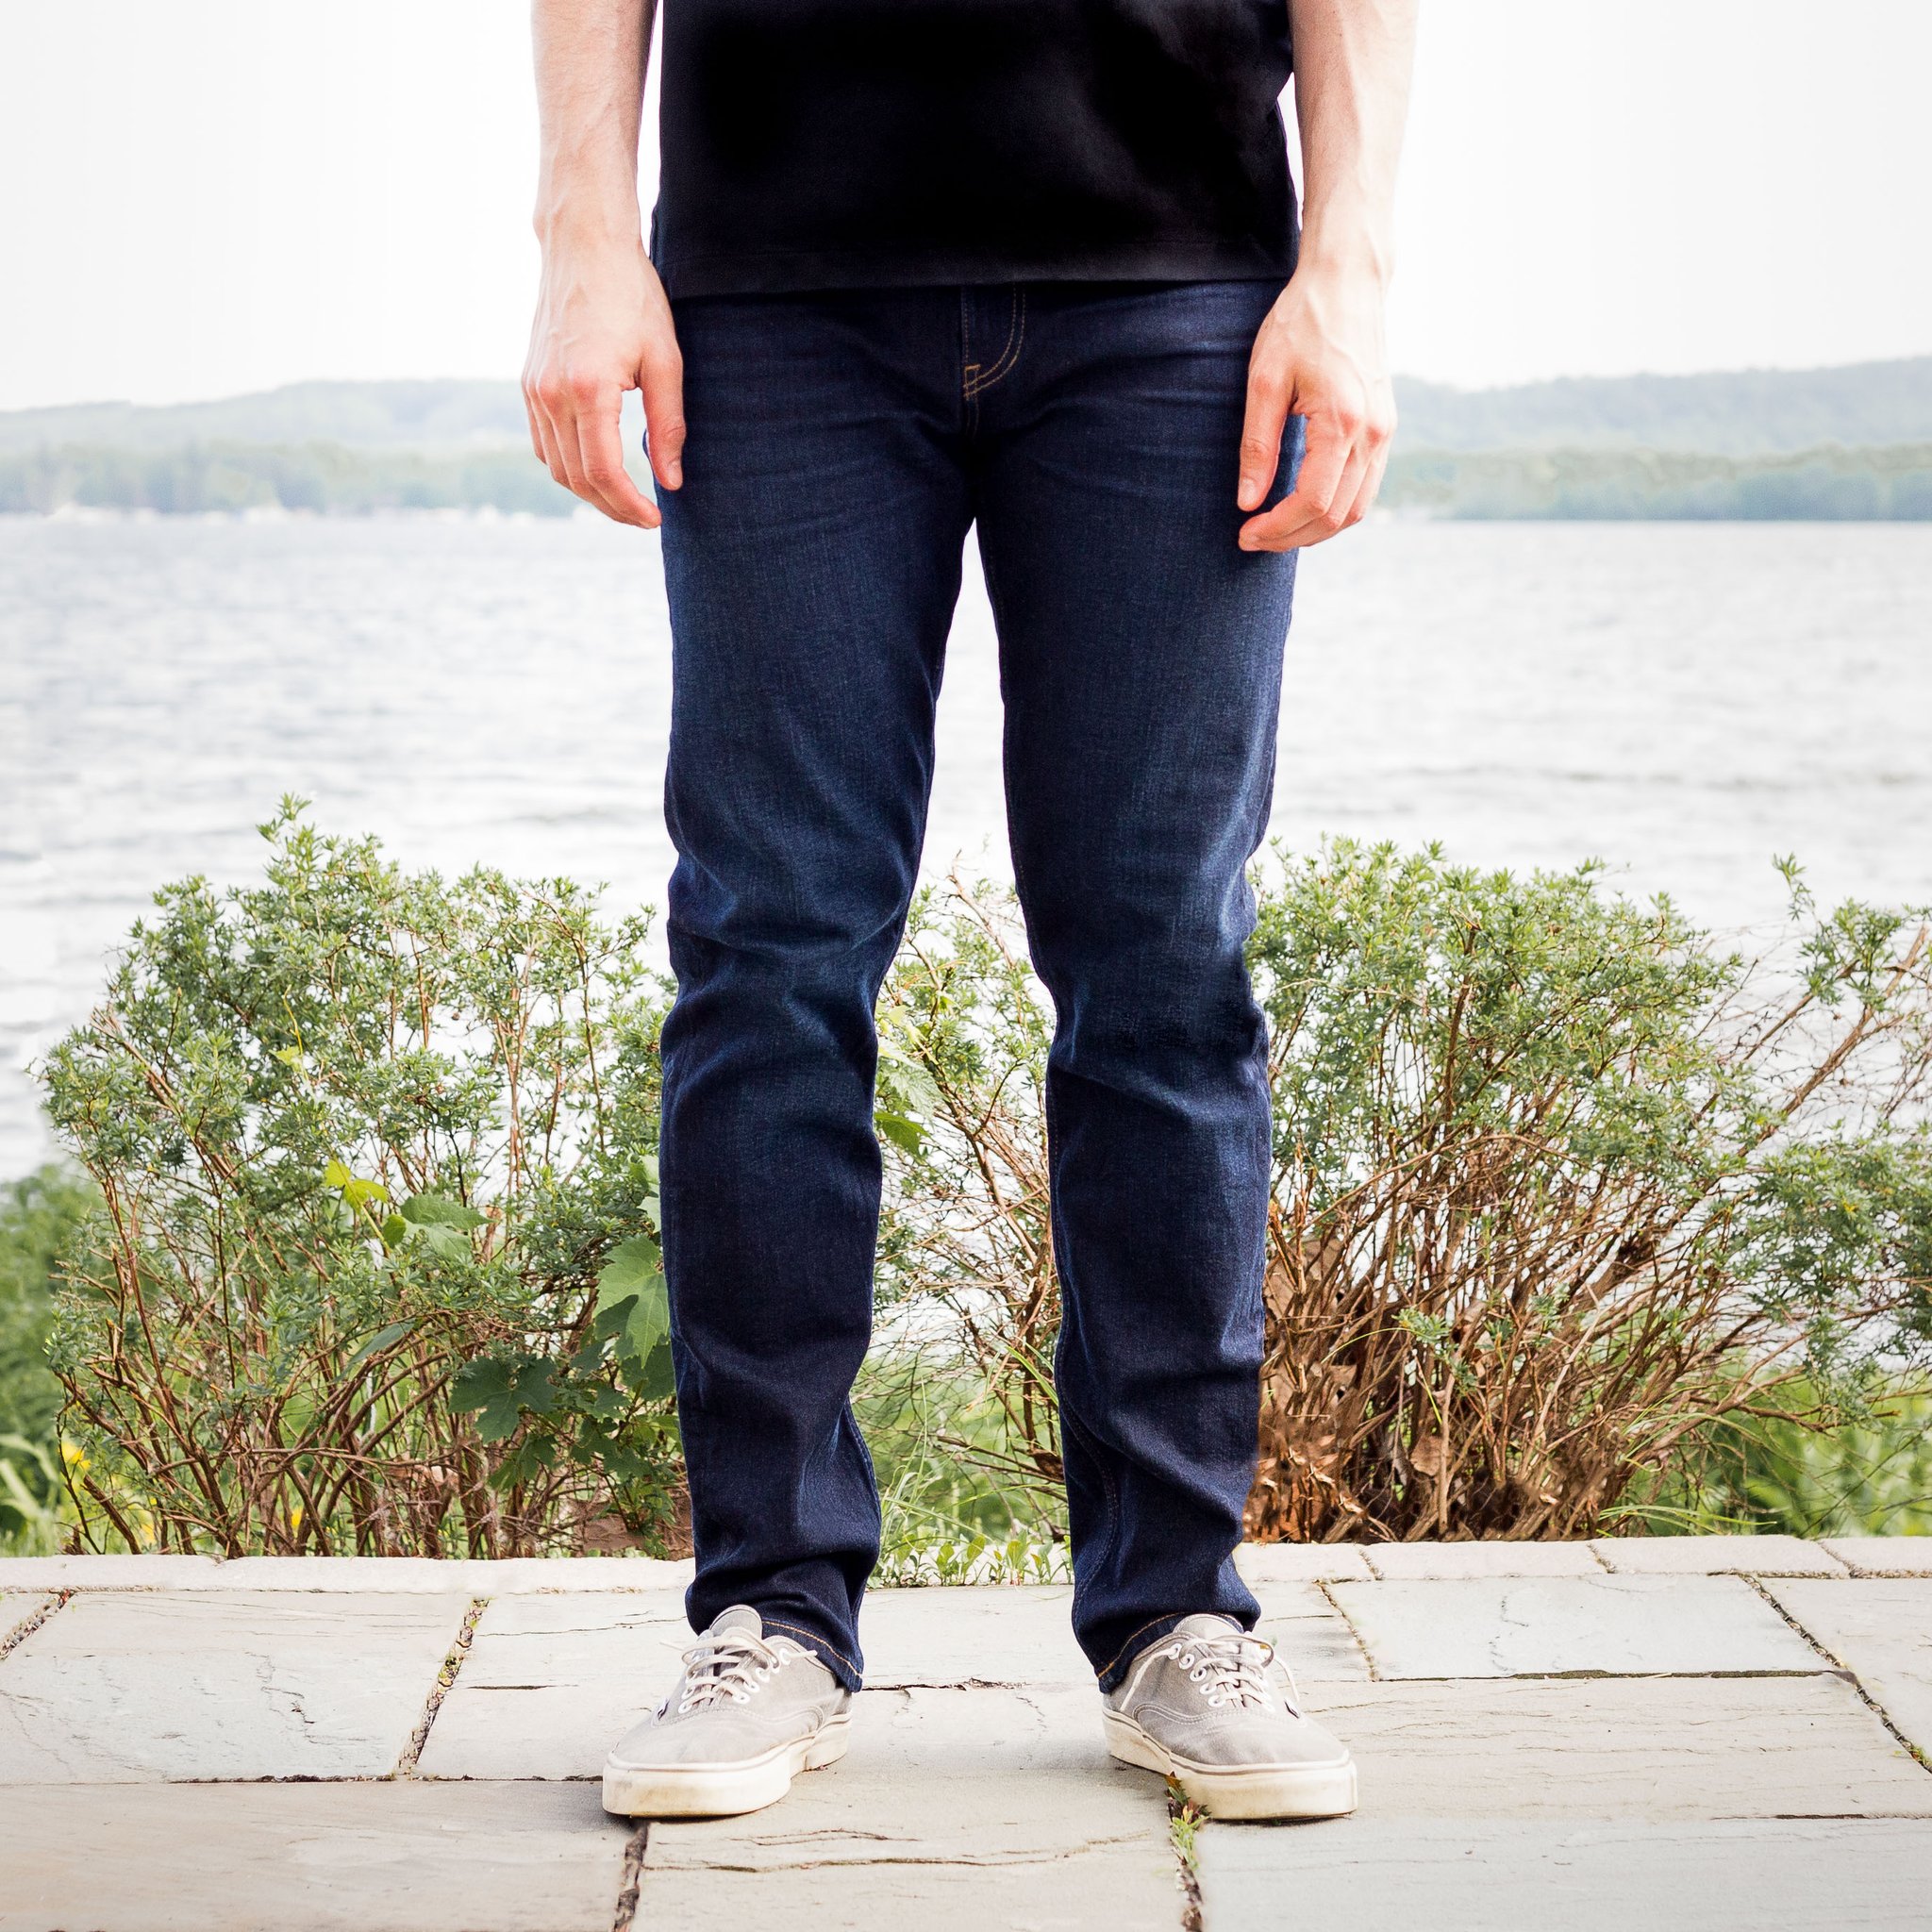 Revtown Jeans Review: This New Denim 